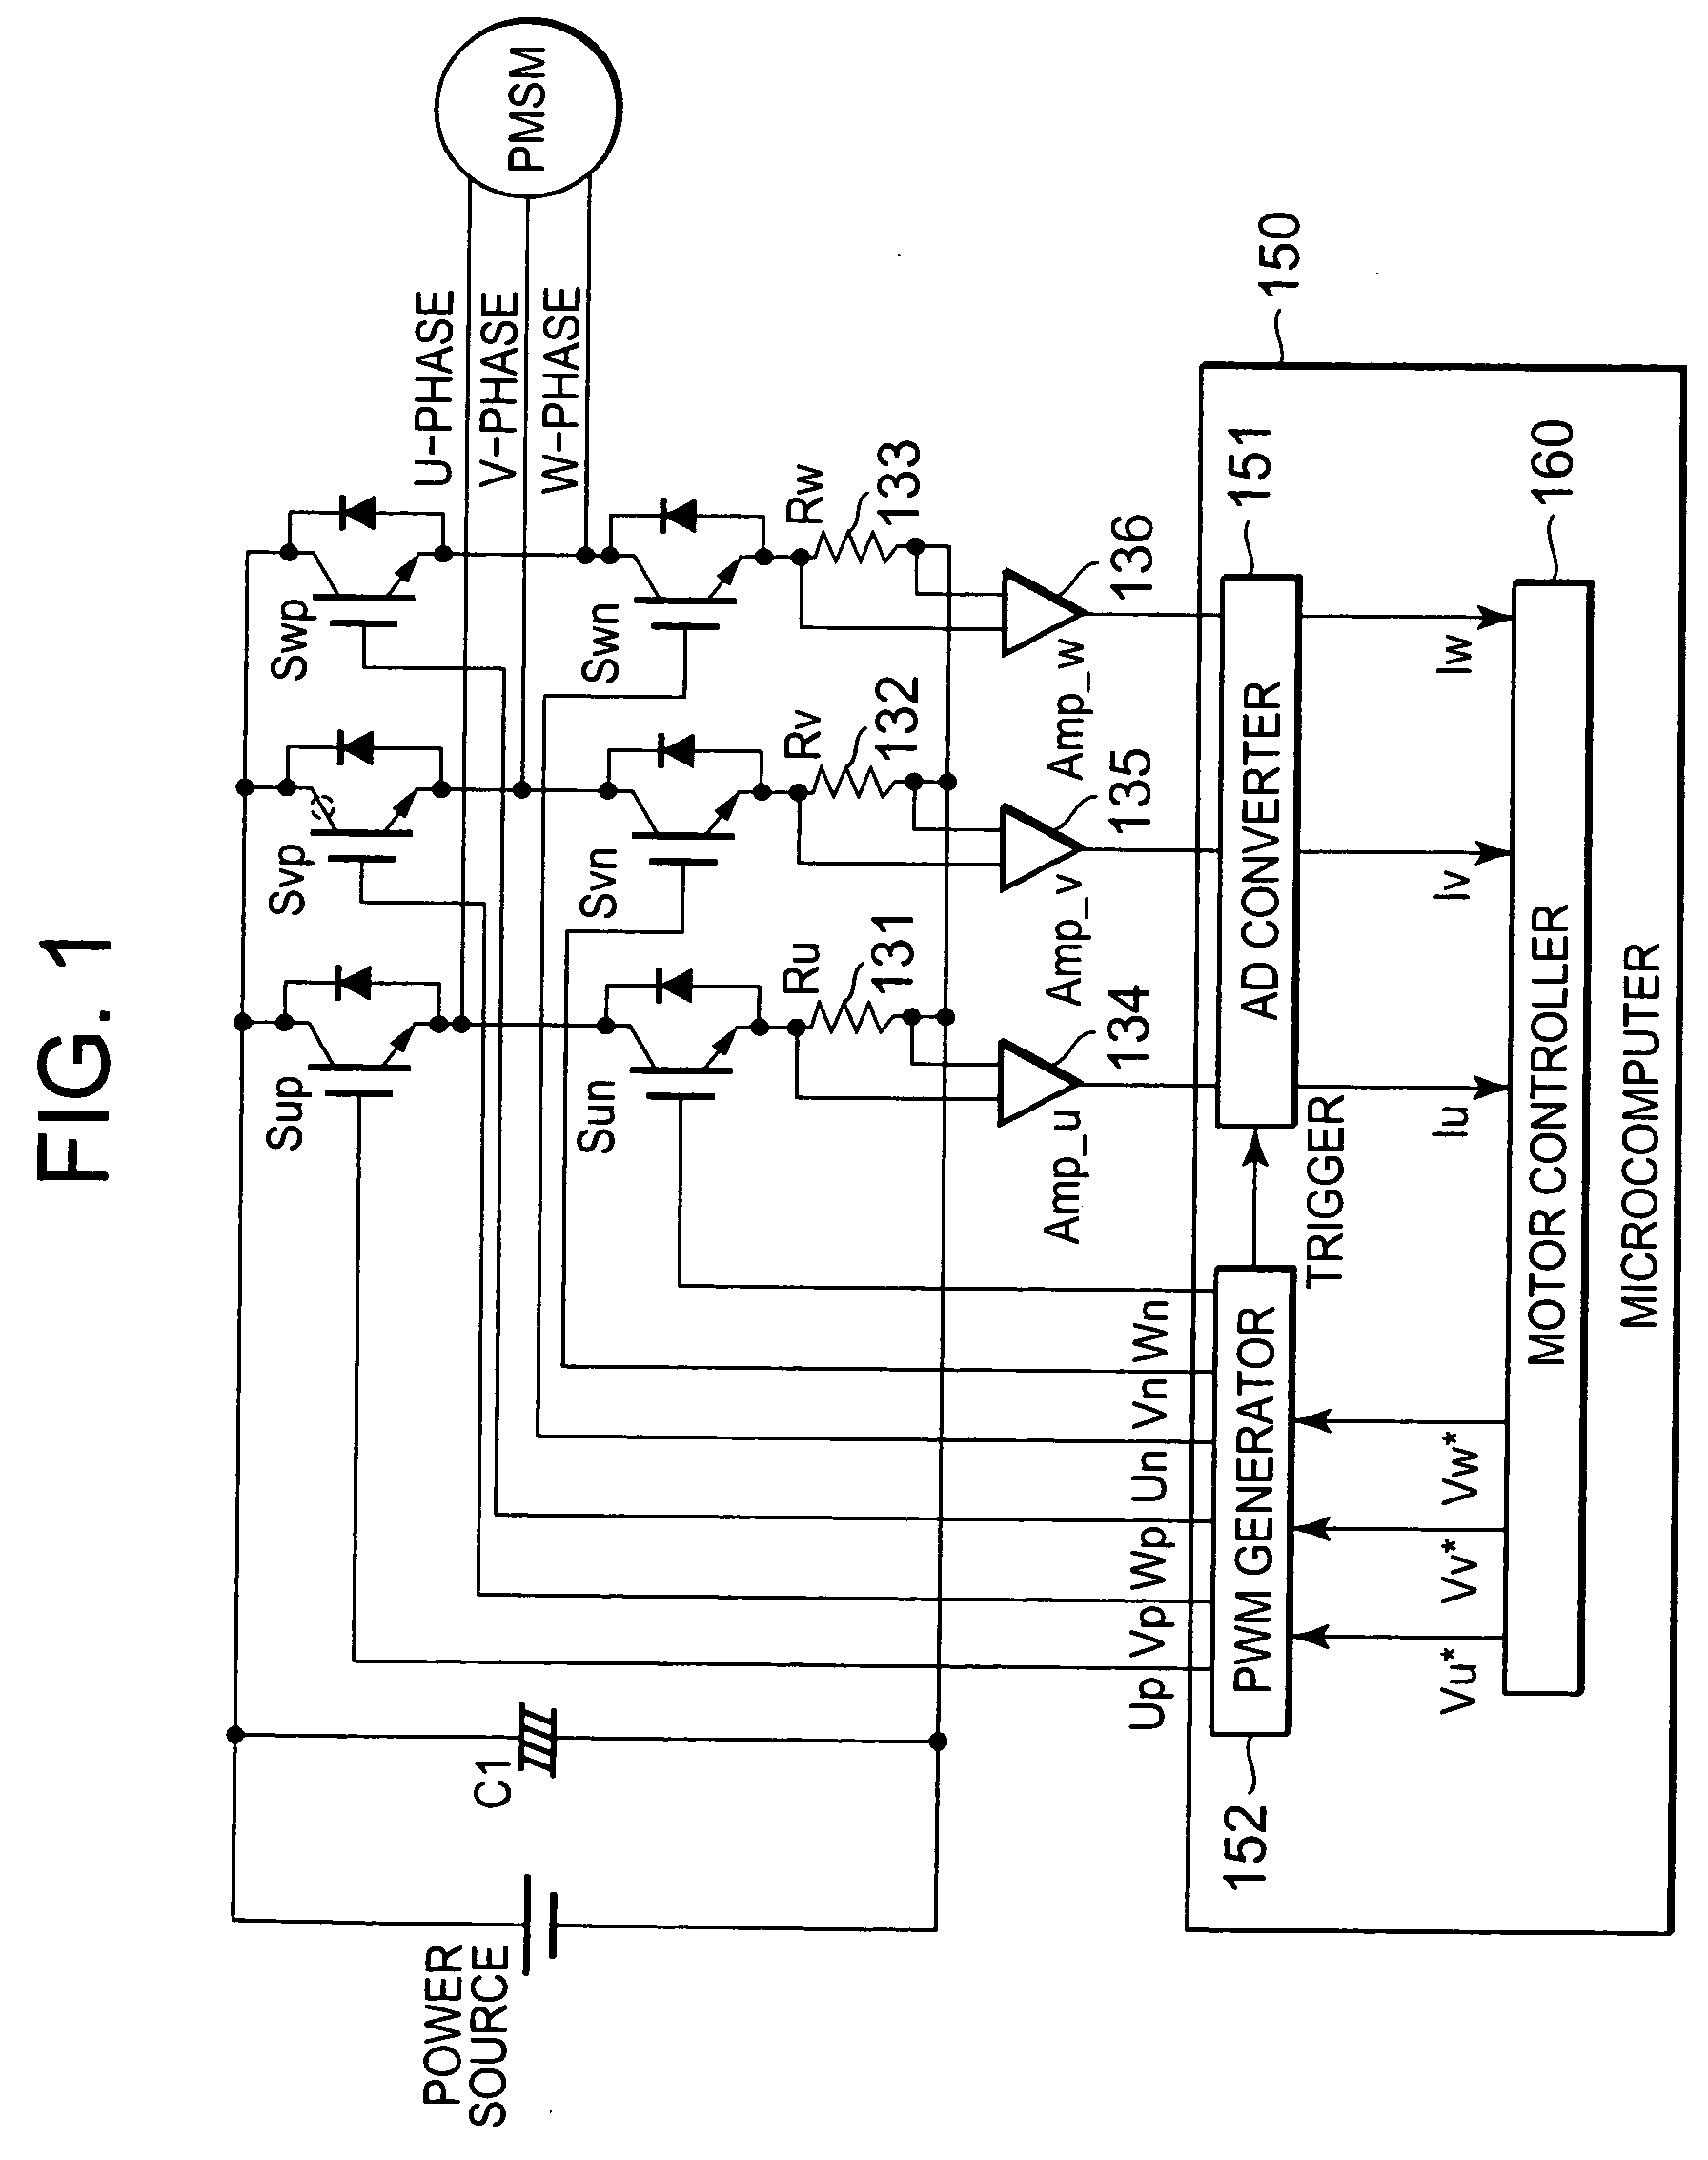 Inverter apparatus and a semiconductor device used for the same